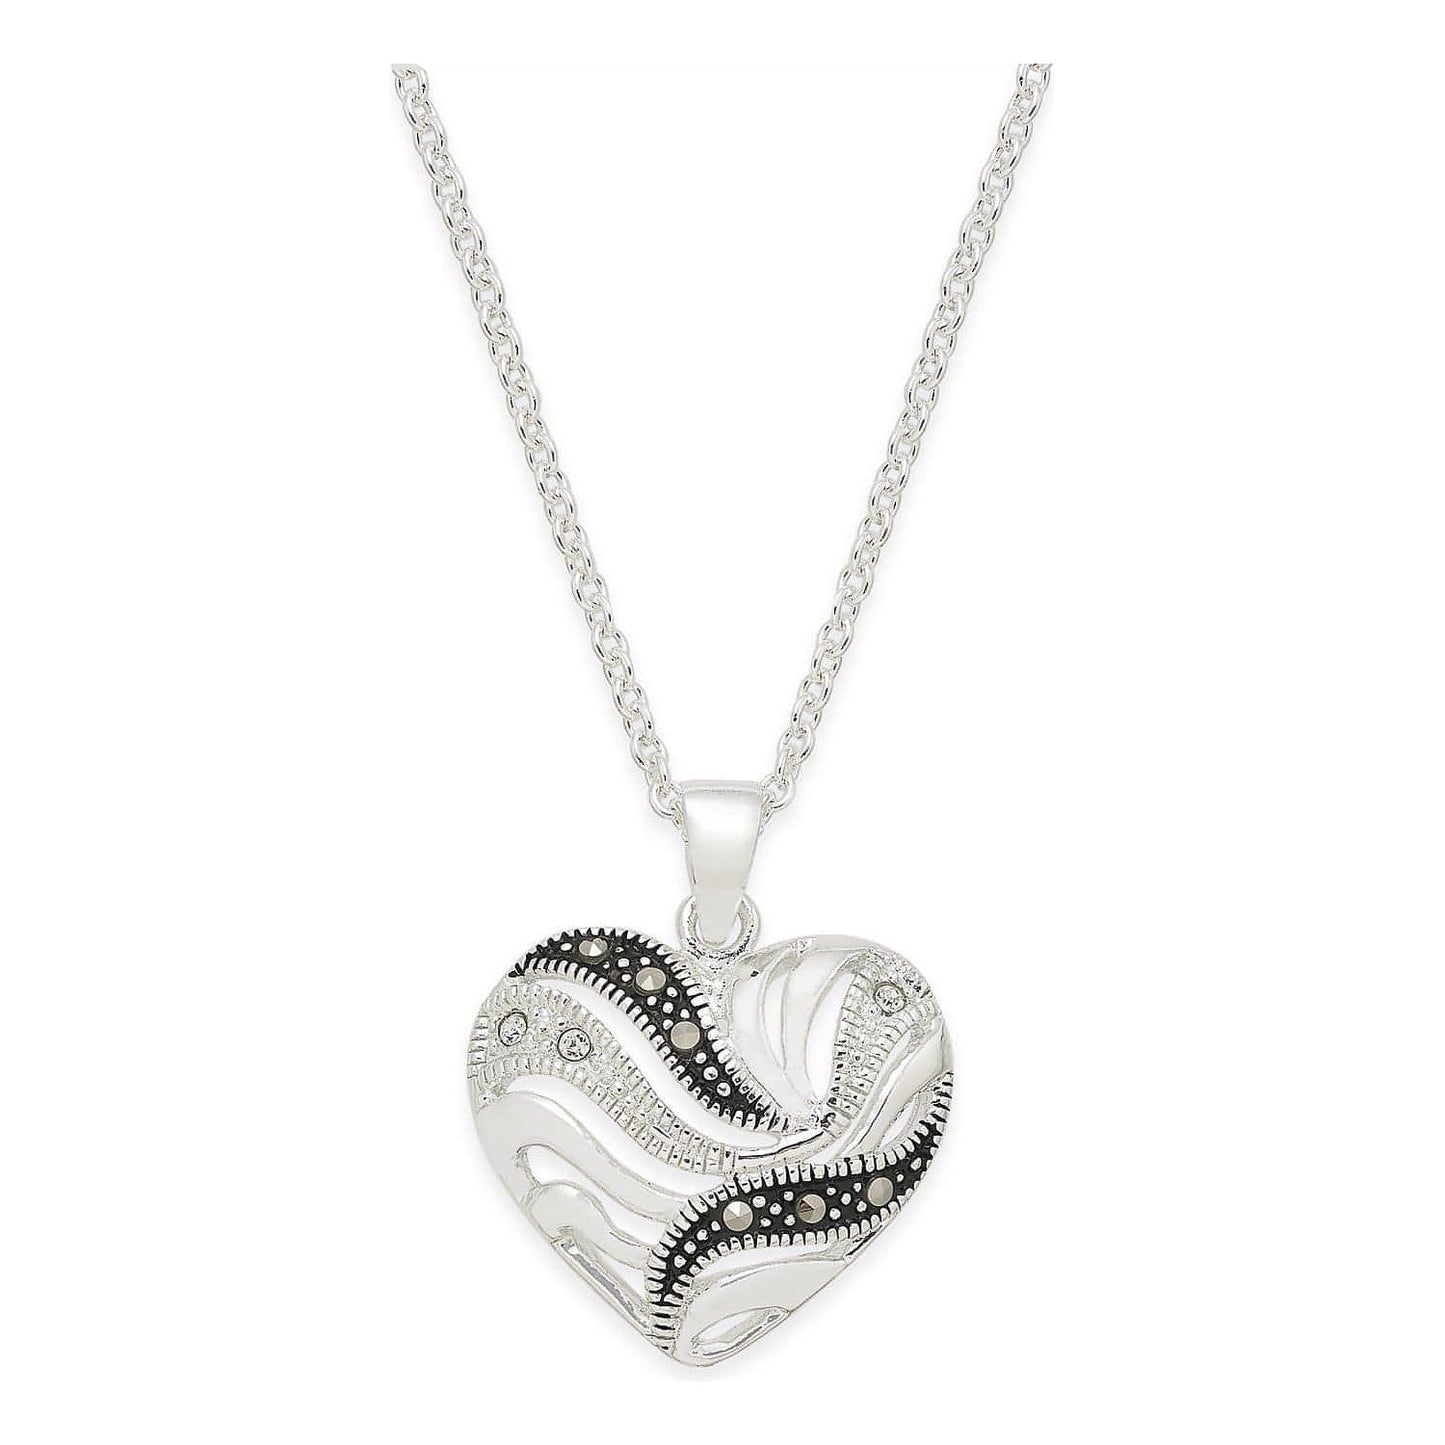 Marcasite and Crystal Heart Pendant Necklace in Silver-Plate - Brandat Outlet, Women's Handbags Outlet ,Handbags Online Outlet | Brands Outlet | Brandat Outlet | Designer Handbags Online |